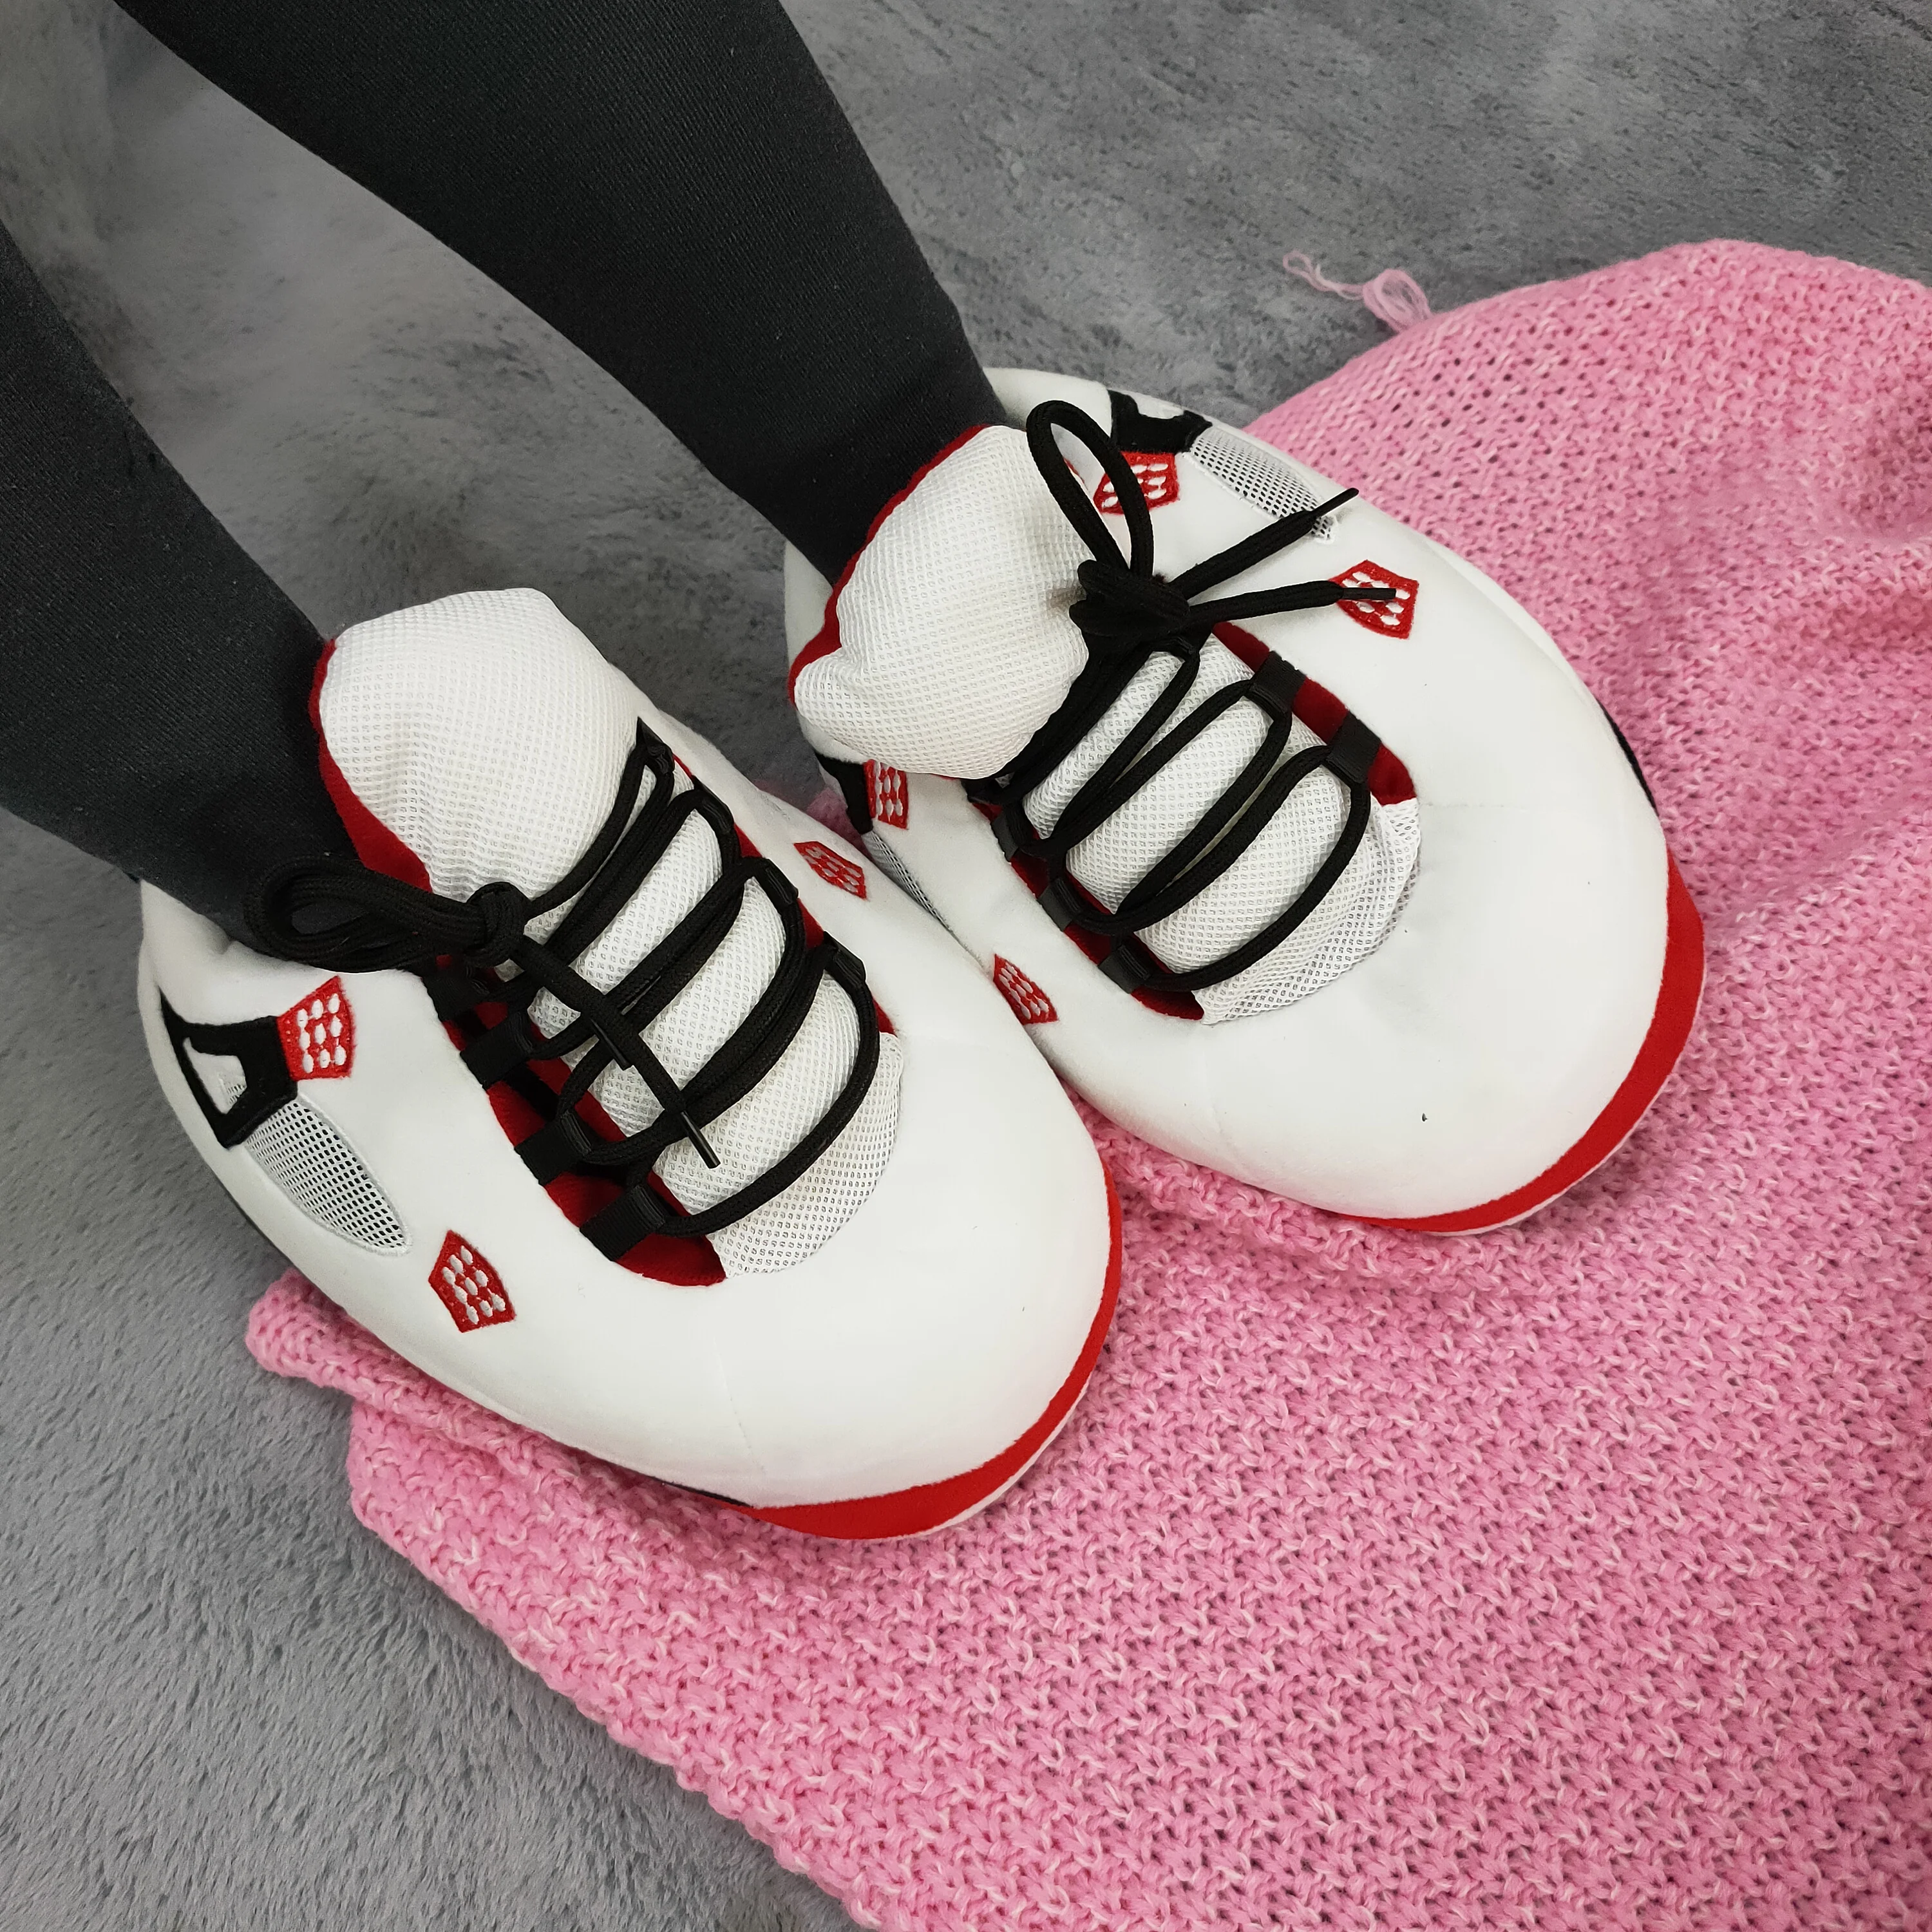 

New Arrival Wholesale Cozy Indoor Shoes Plush Yeezy AJ Sneaker Slippers